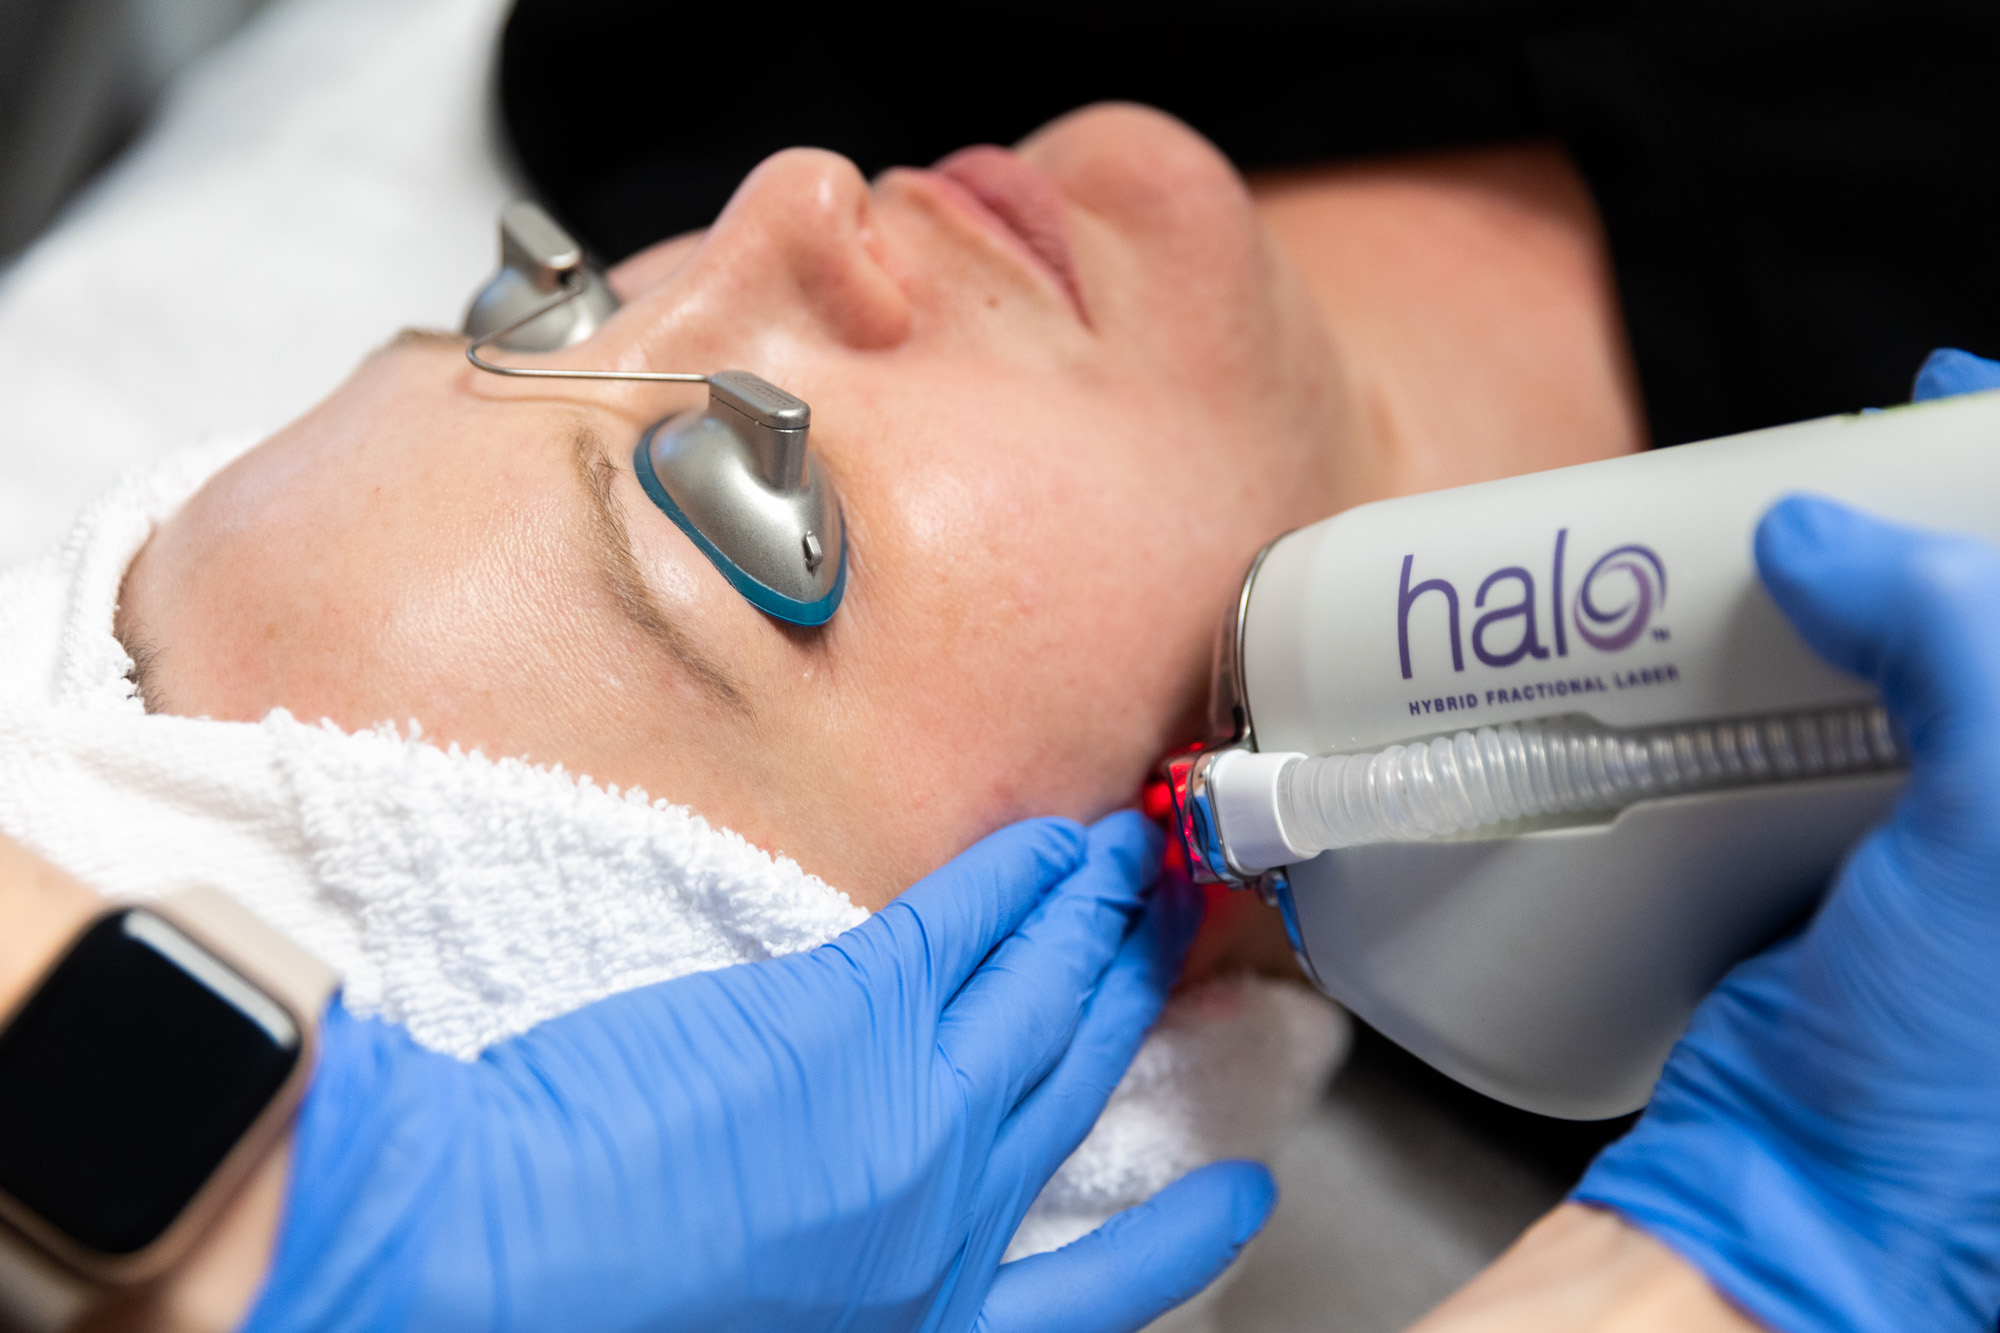 A close up image of a female client receiving HALO treatment. The HALO applicator is pressed against her right cheek, and she is wearing protective eye coverings.